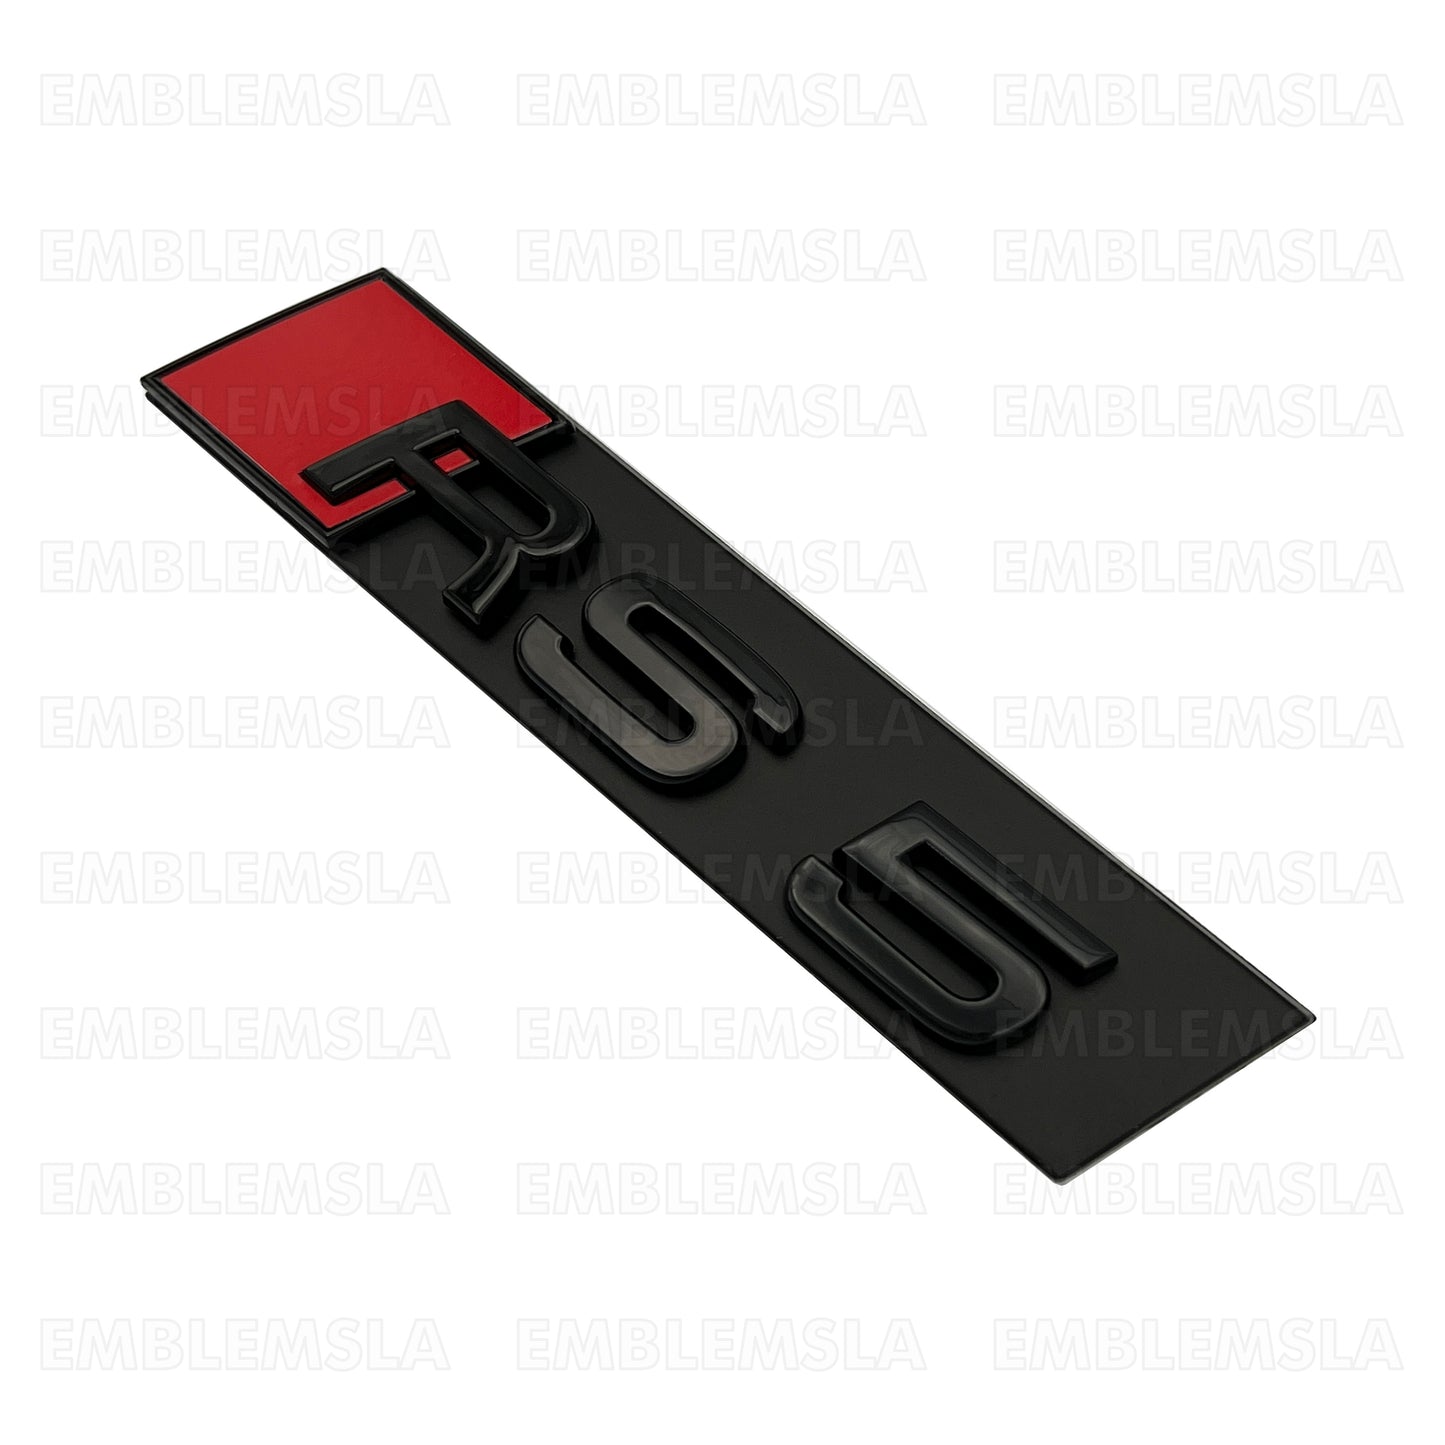 Audi RS5 Front Grill Emblem Gloss Black for RS5 A S5 Hood Grille Badge Nameplate